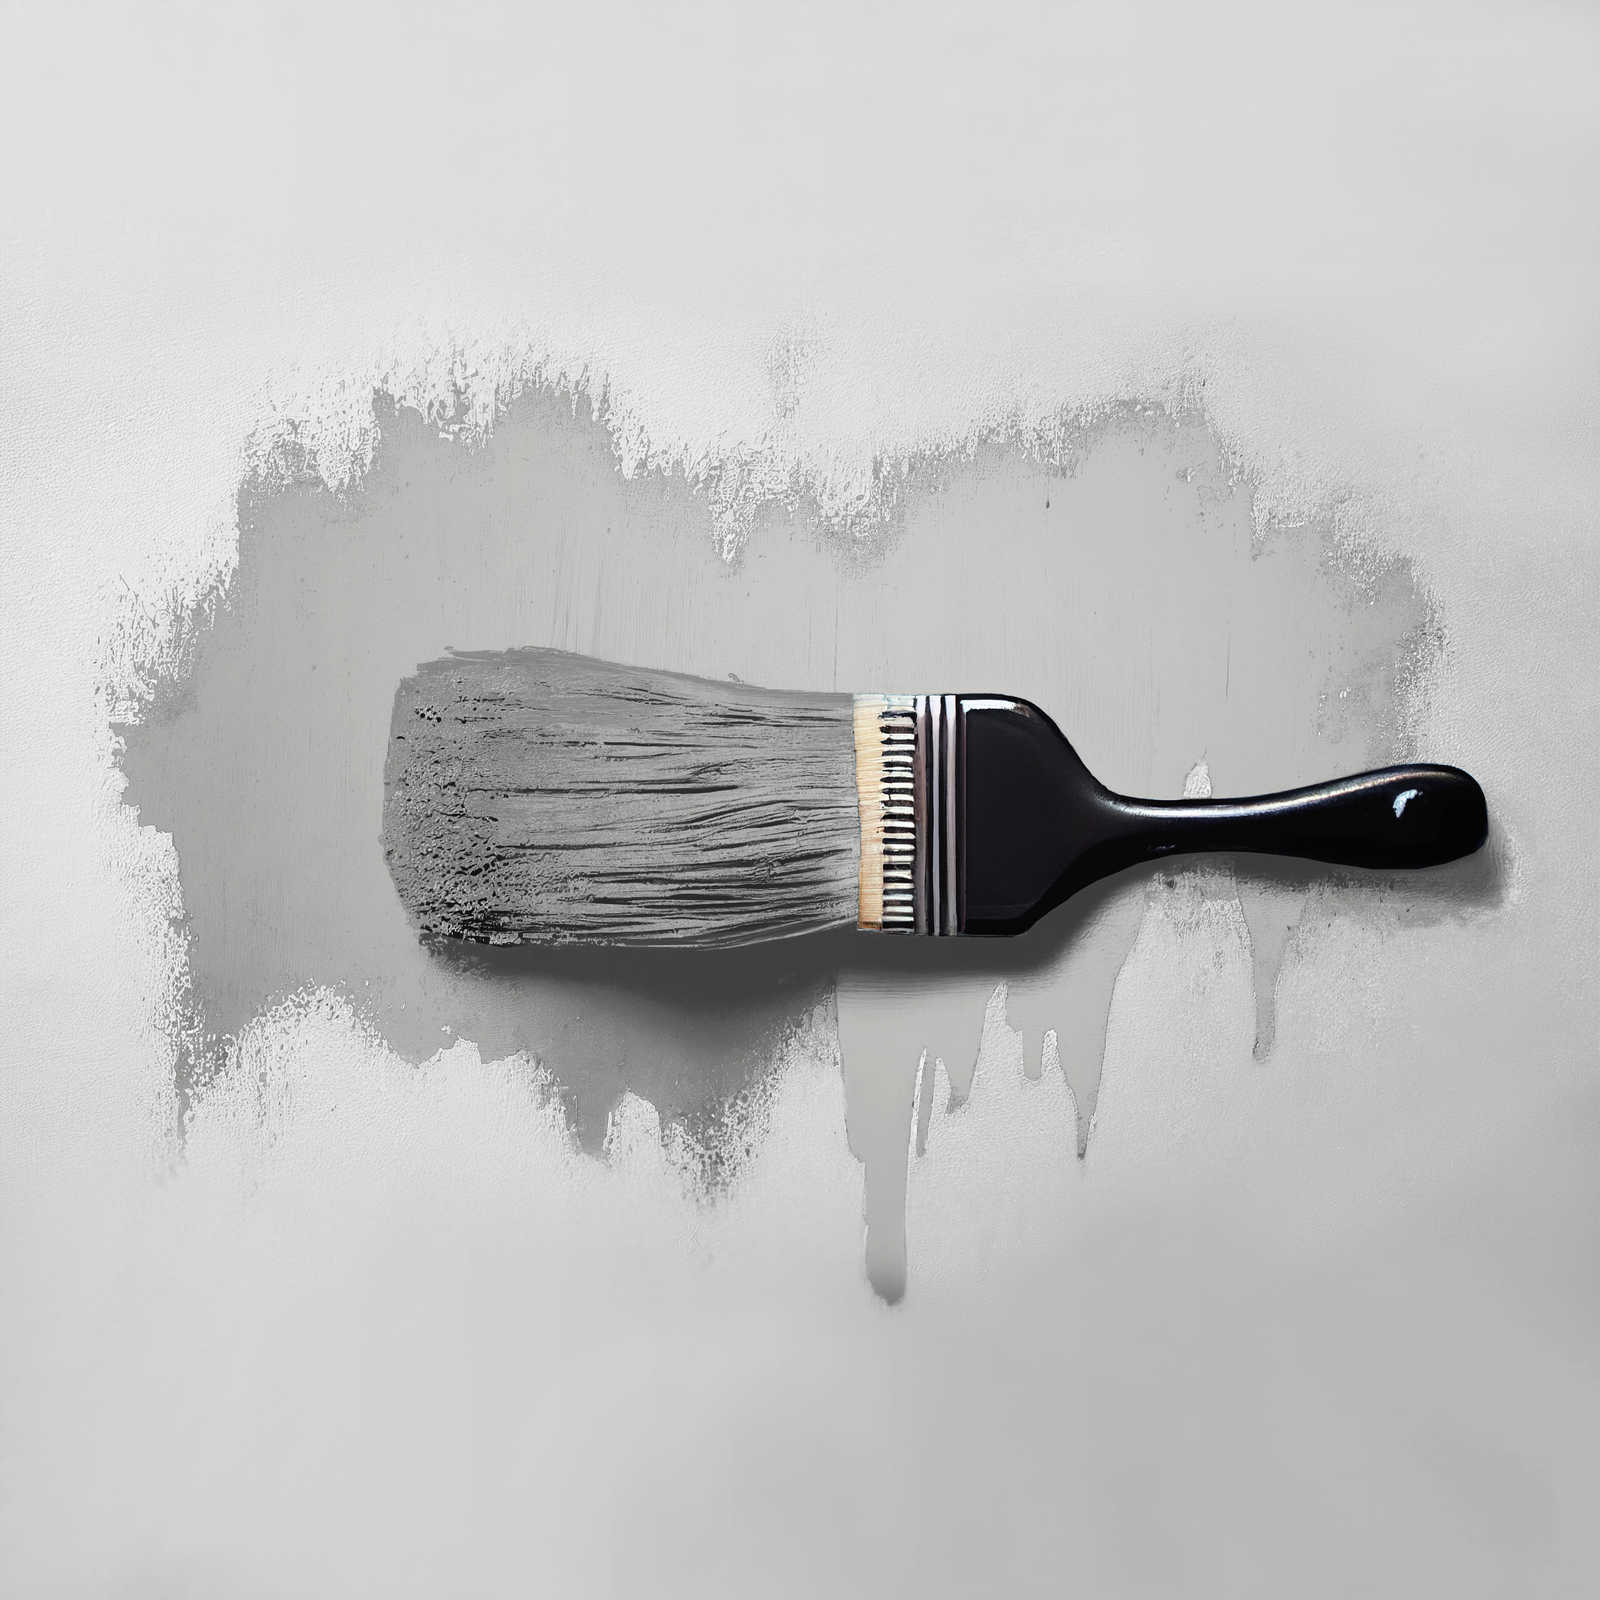             Wall Paint TCK1004 »Shady Spice« in cool grey – 5.0 litre
        